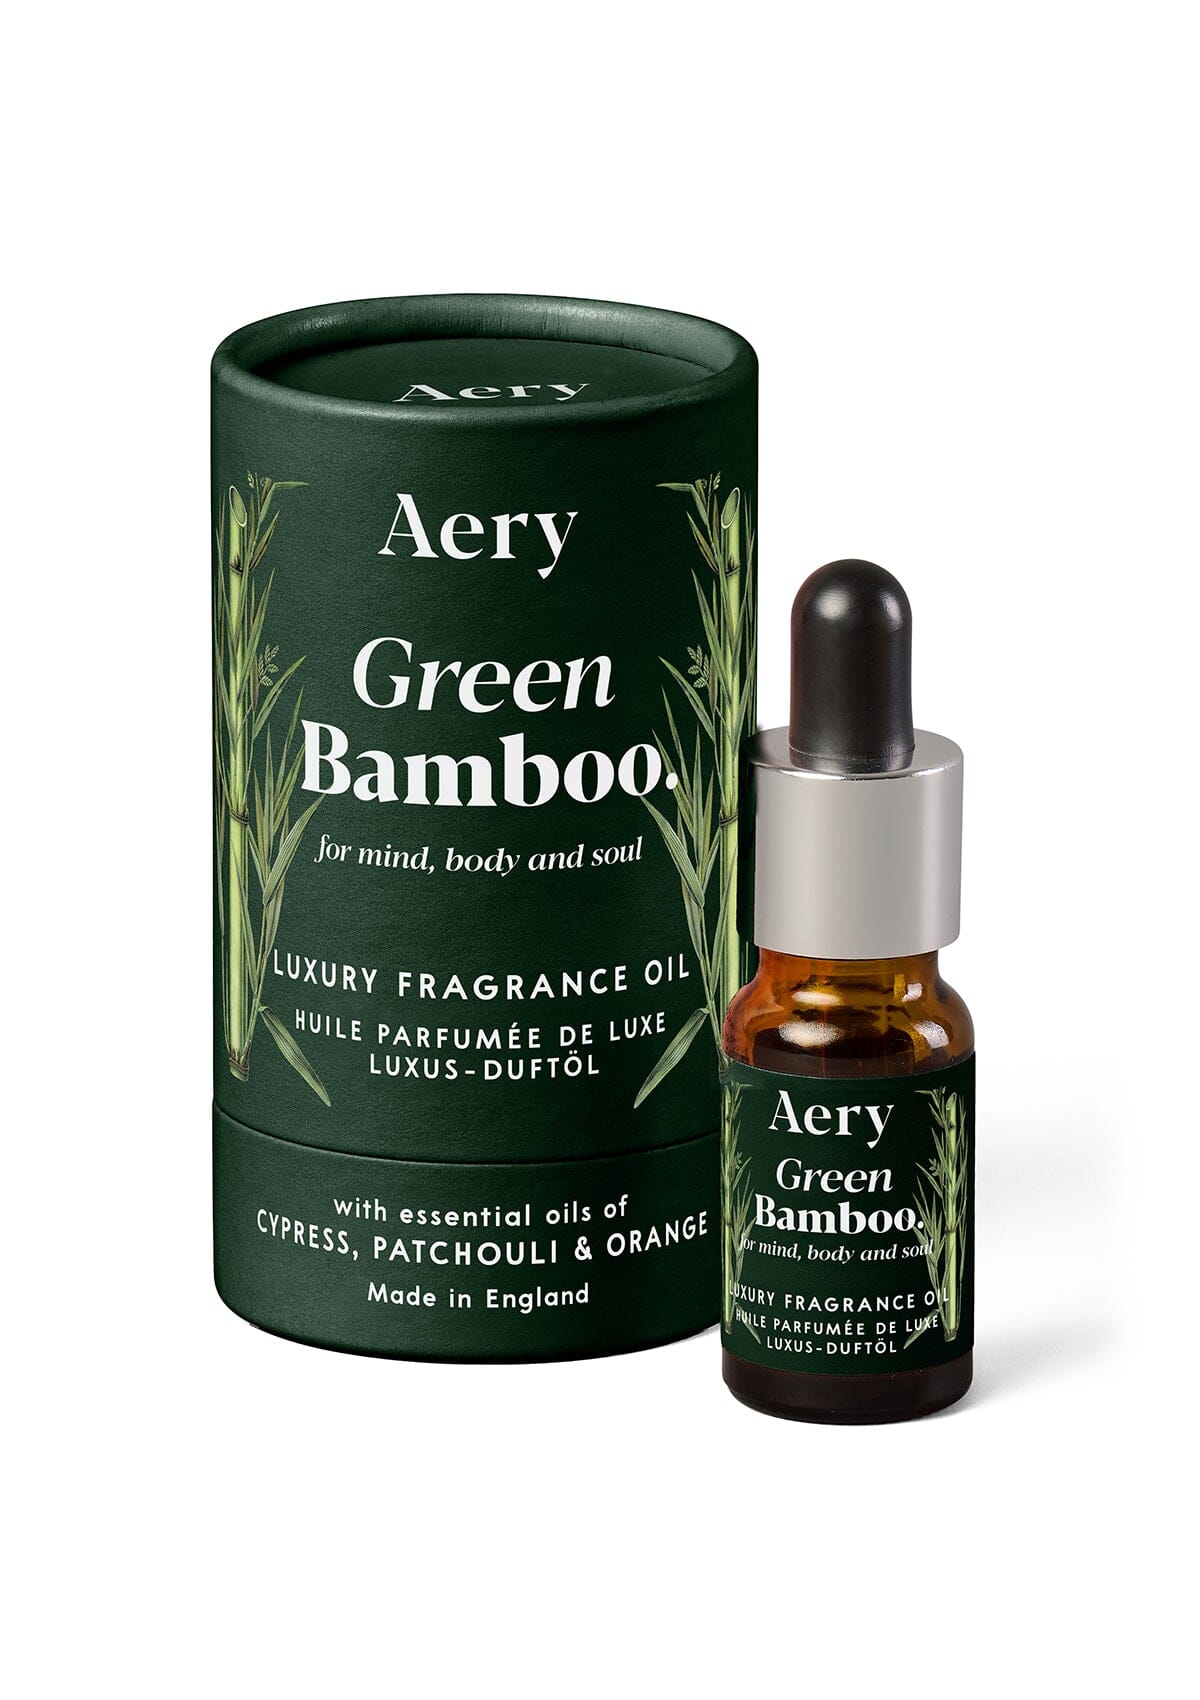 Green Bamboo fragrance oil displayed next to product packaging by Aery on white background 